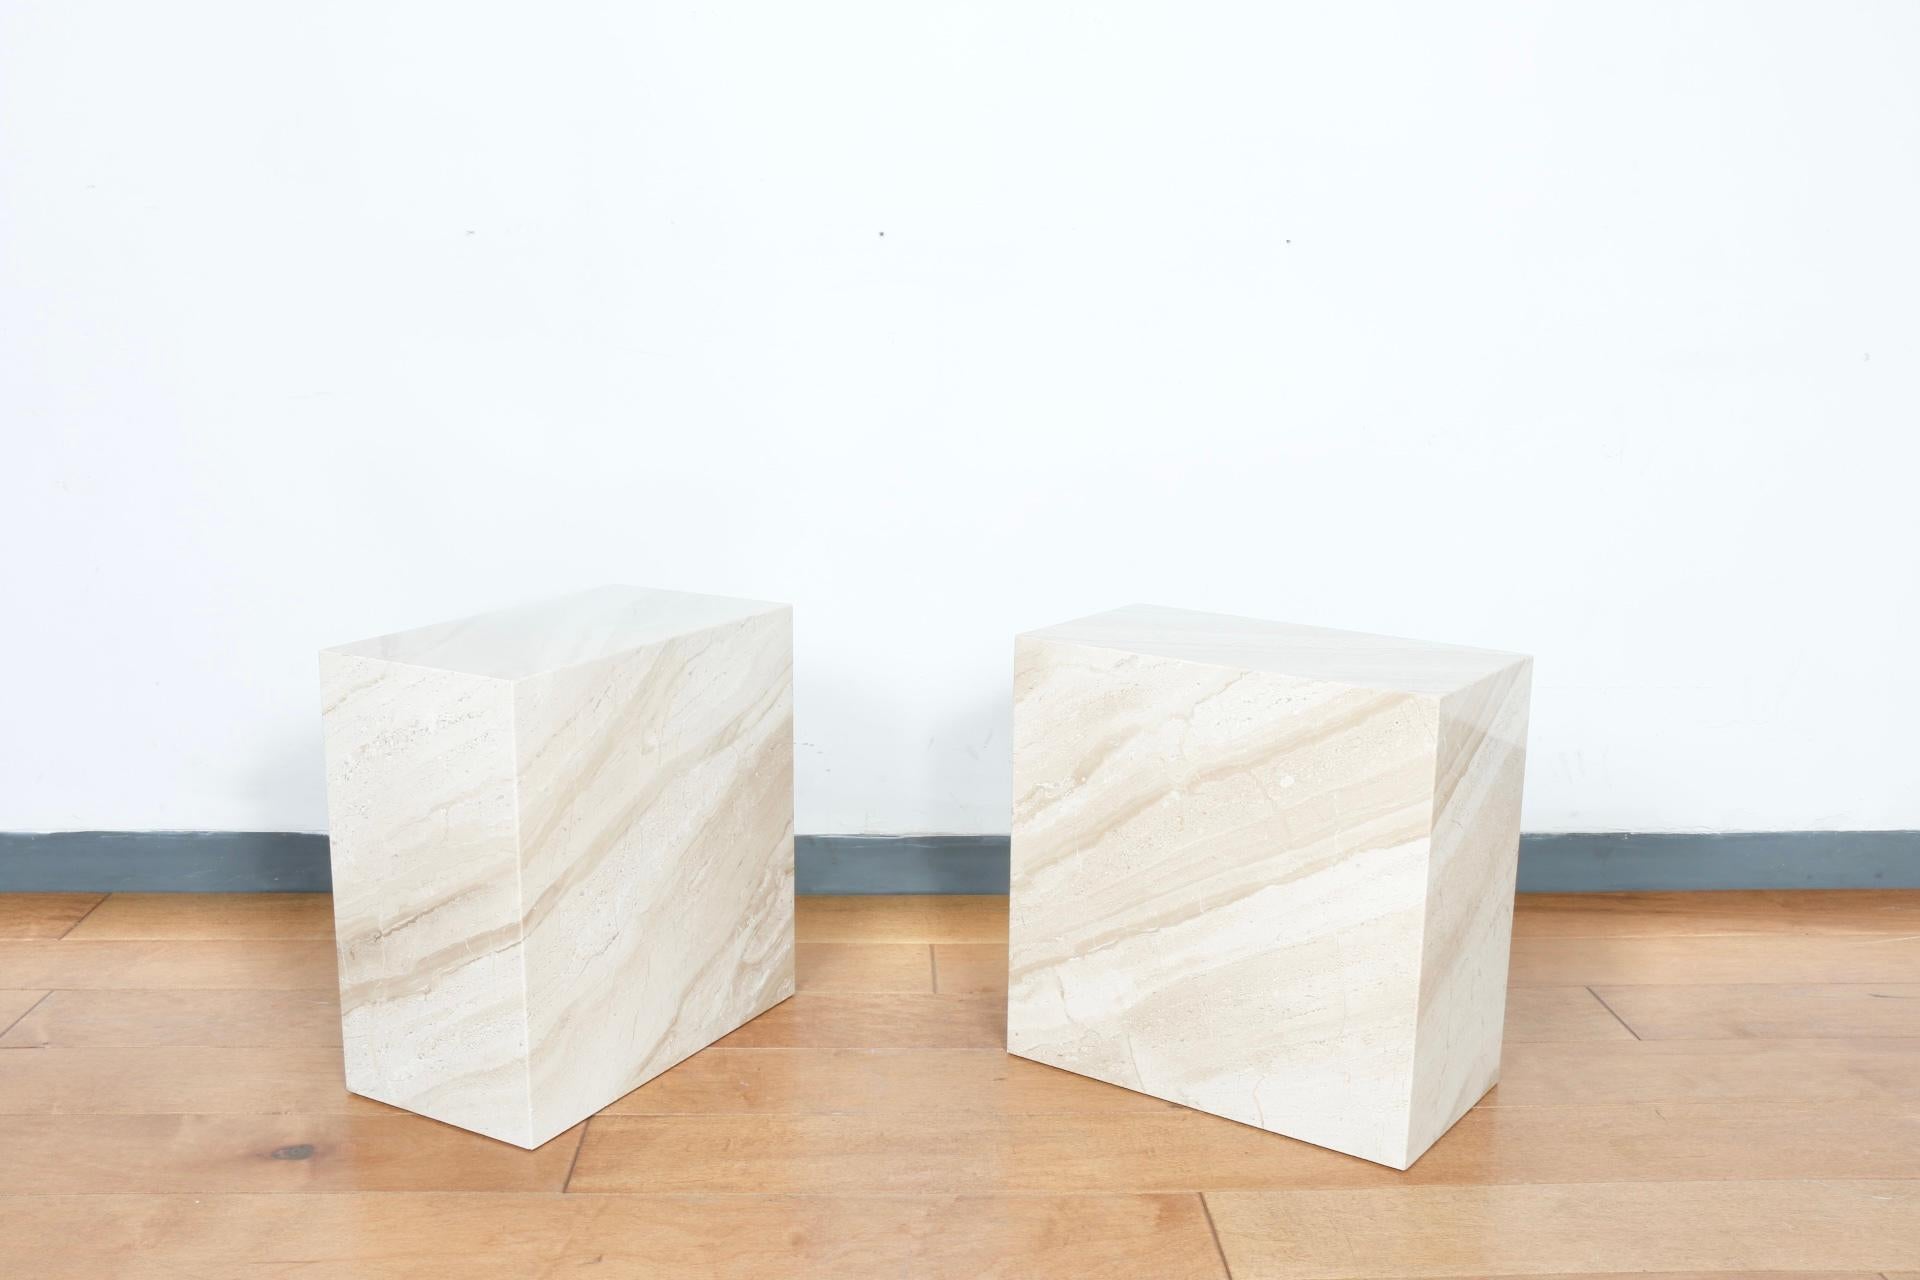 Pair of beautiful well kept marble low pedestals. Great style and design. No broken parts or chips. Can be used as pedestals or low side tables